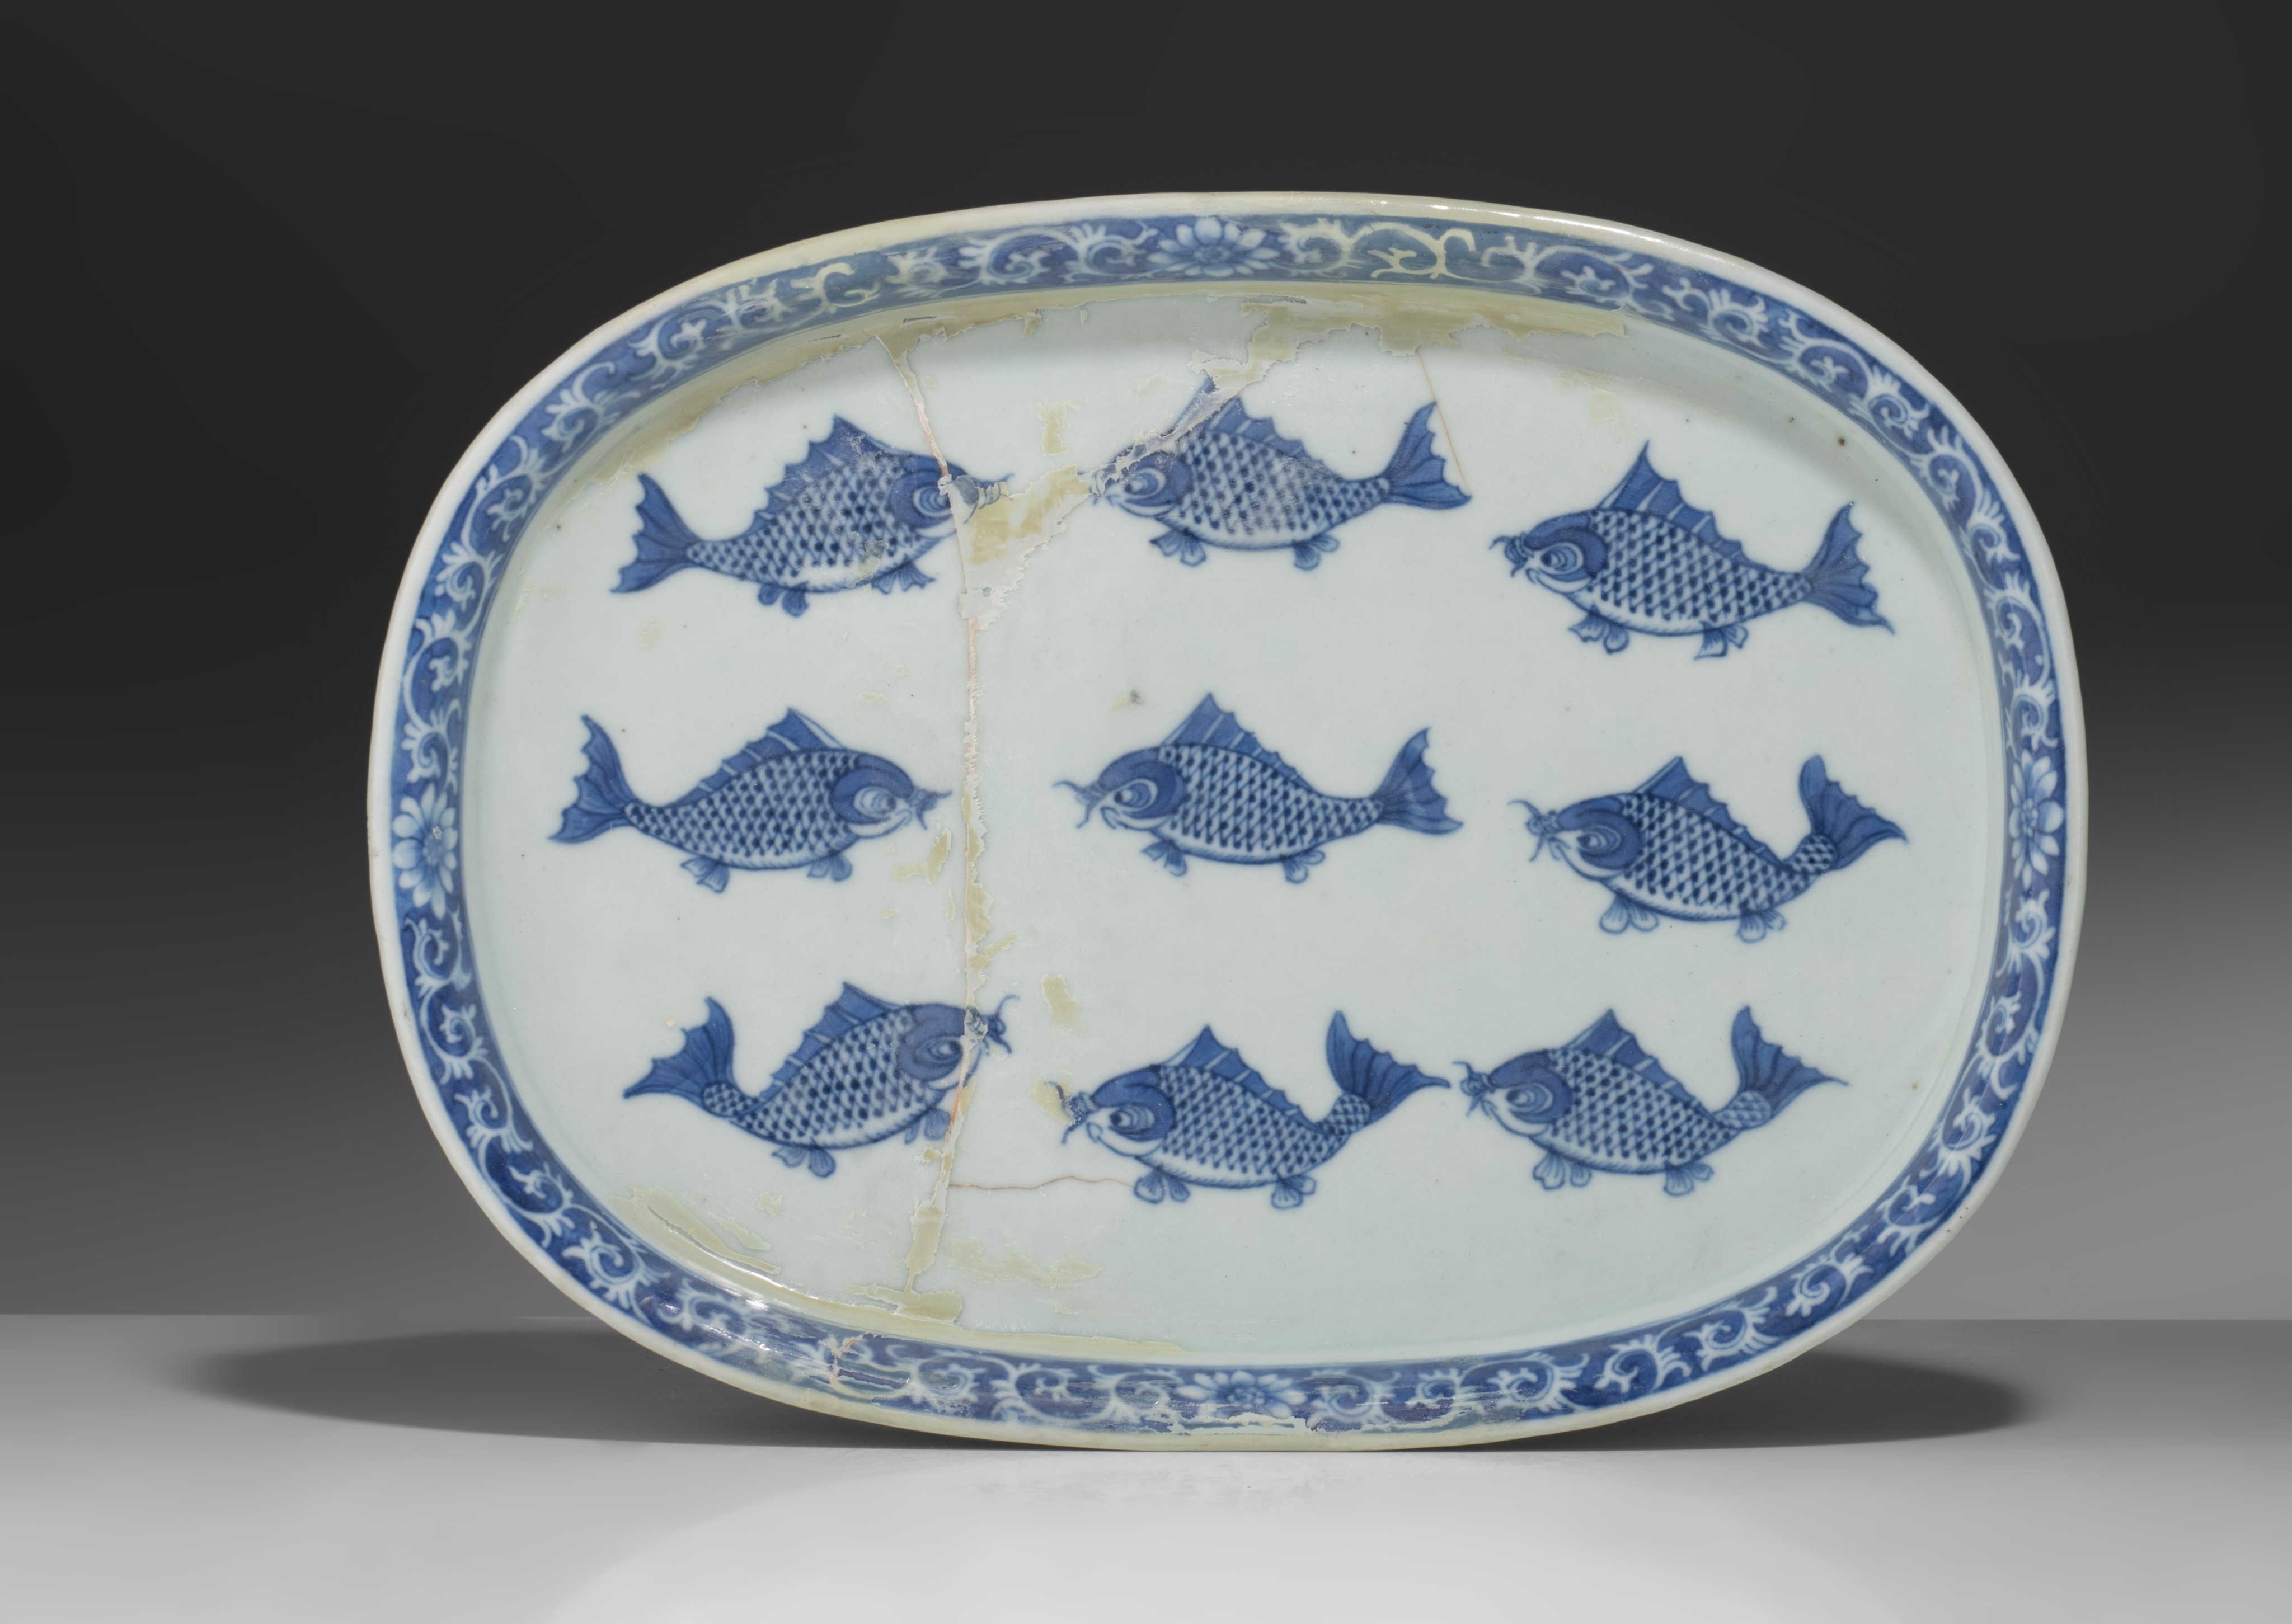 A collection of various Chinese export ware, 18thC, largest 37 x 25 cm - Image 2 of 15